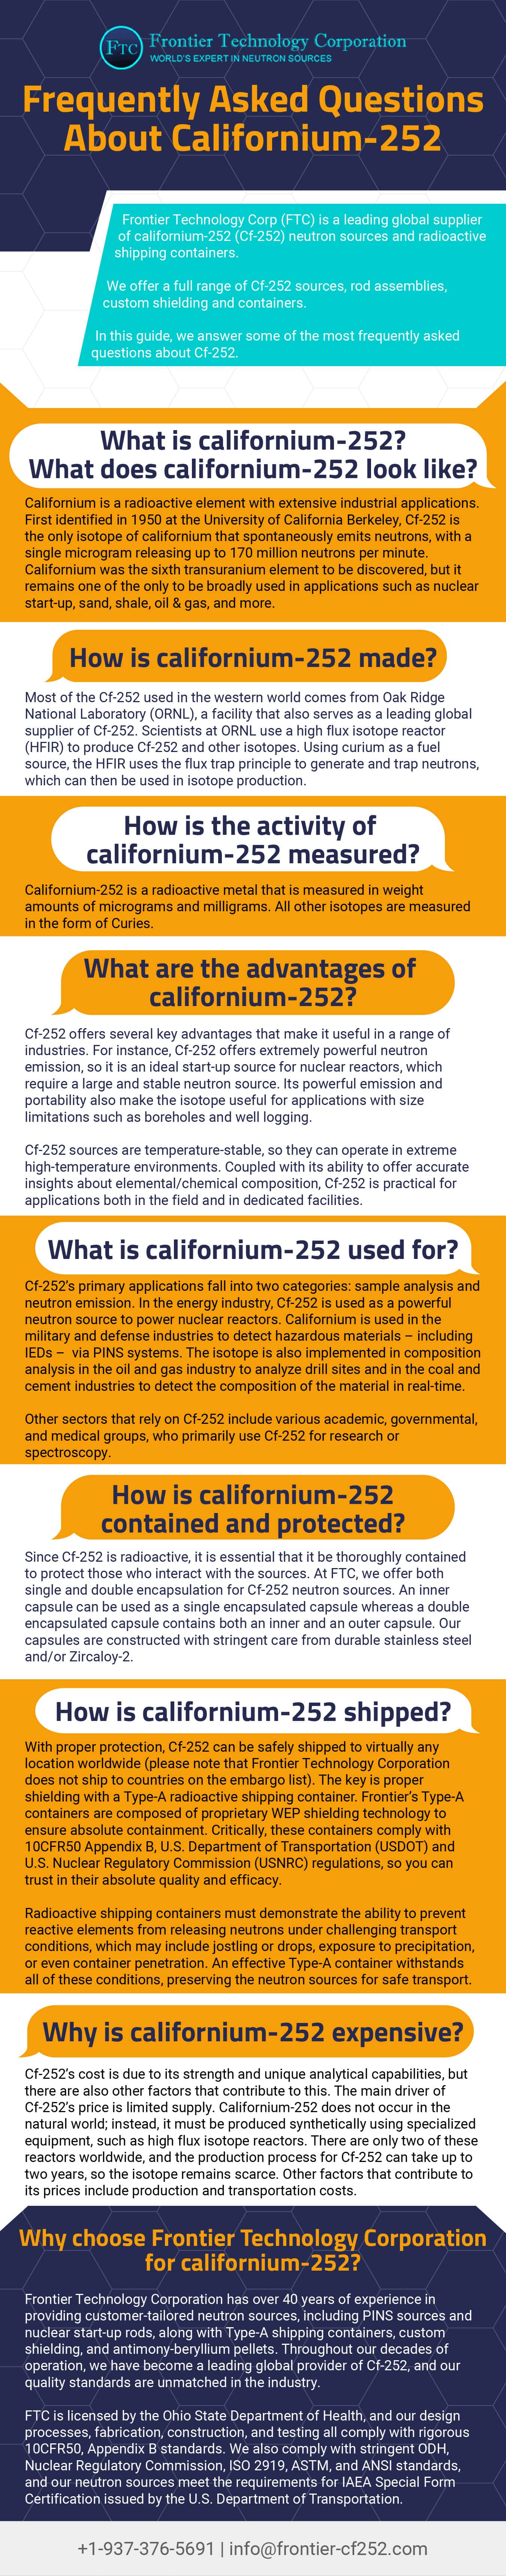 Frequently Asked Questions About Californium-252